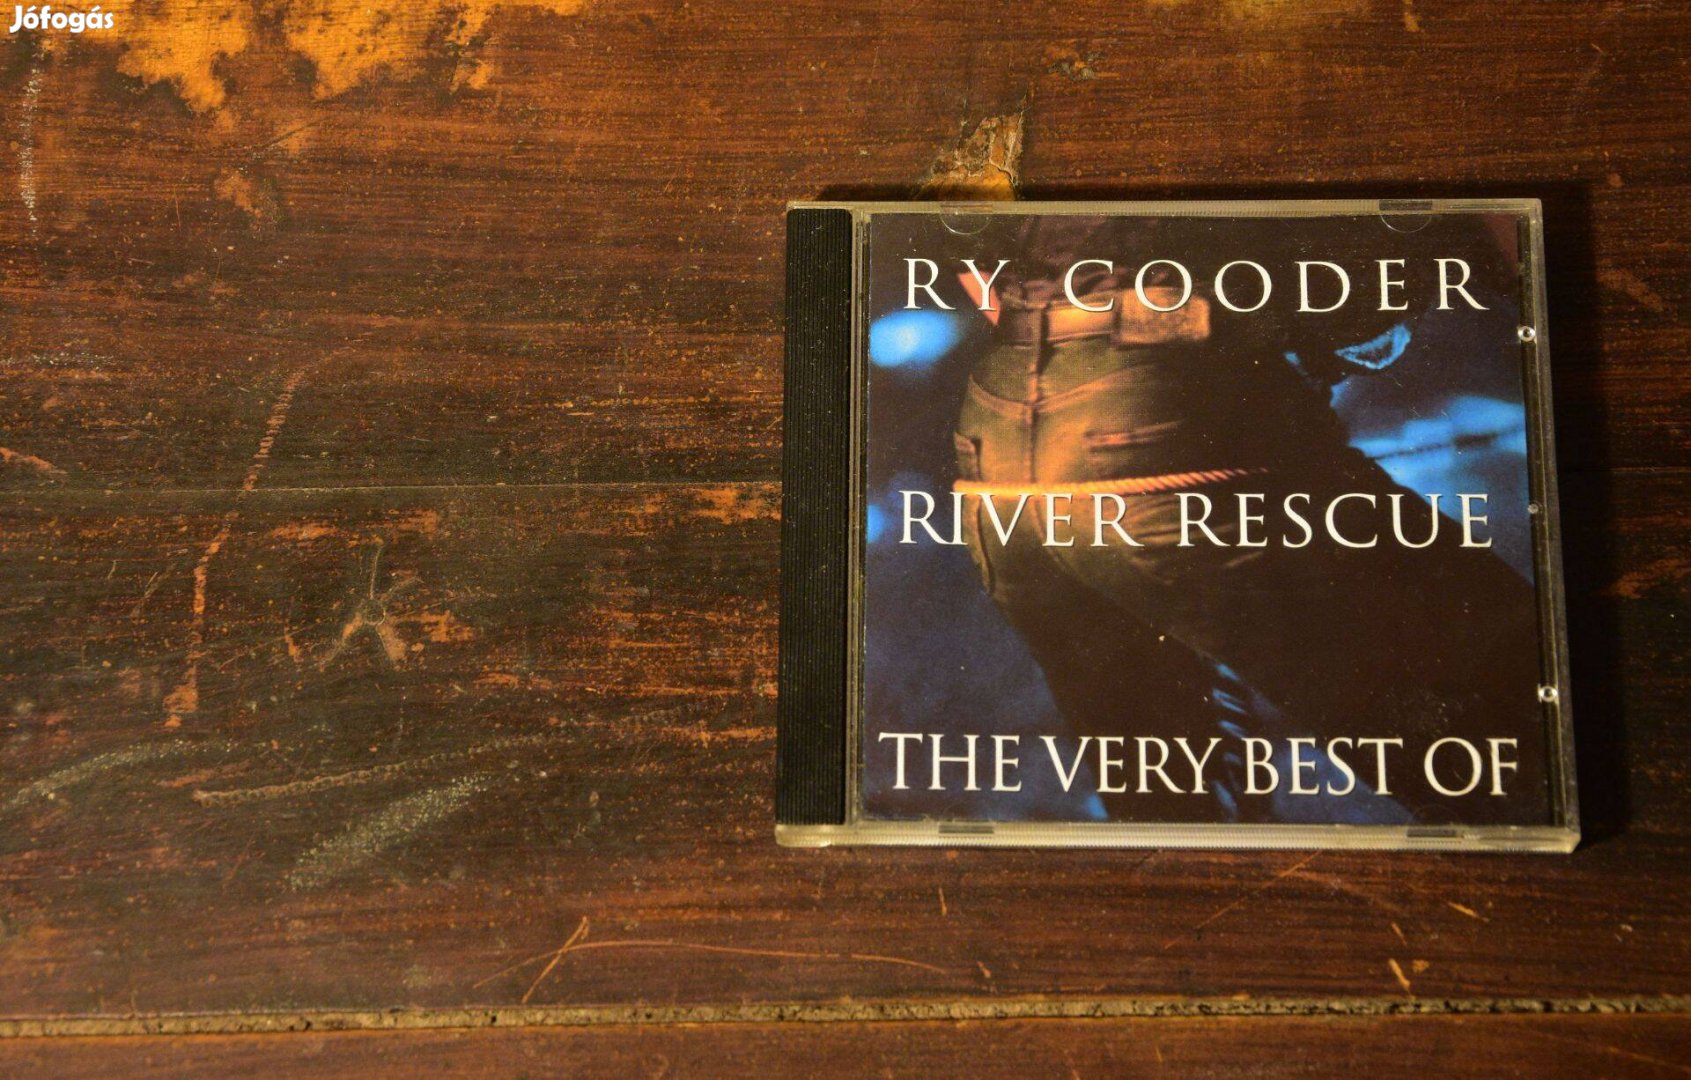 CD Ry Cooder River Rescue The Very Best Of